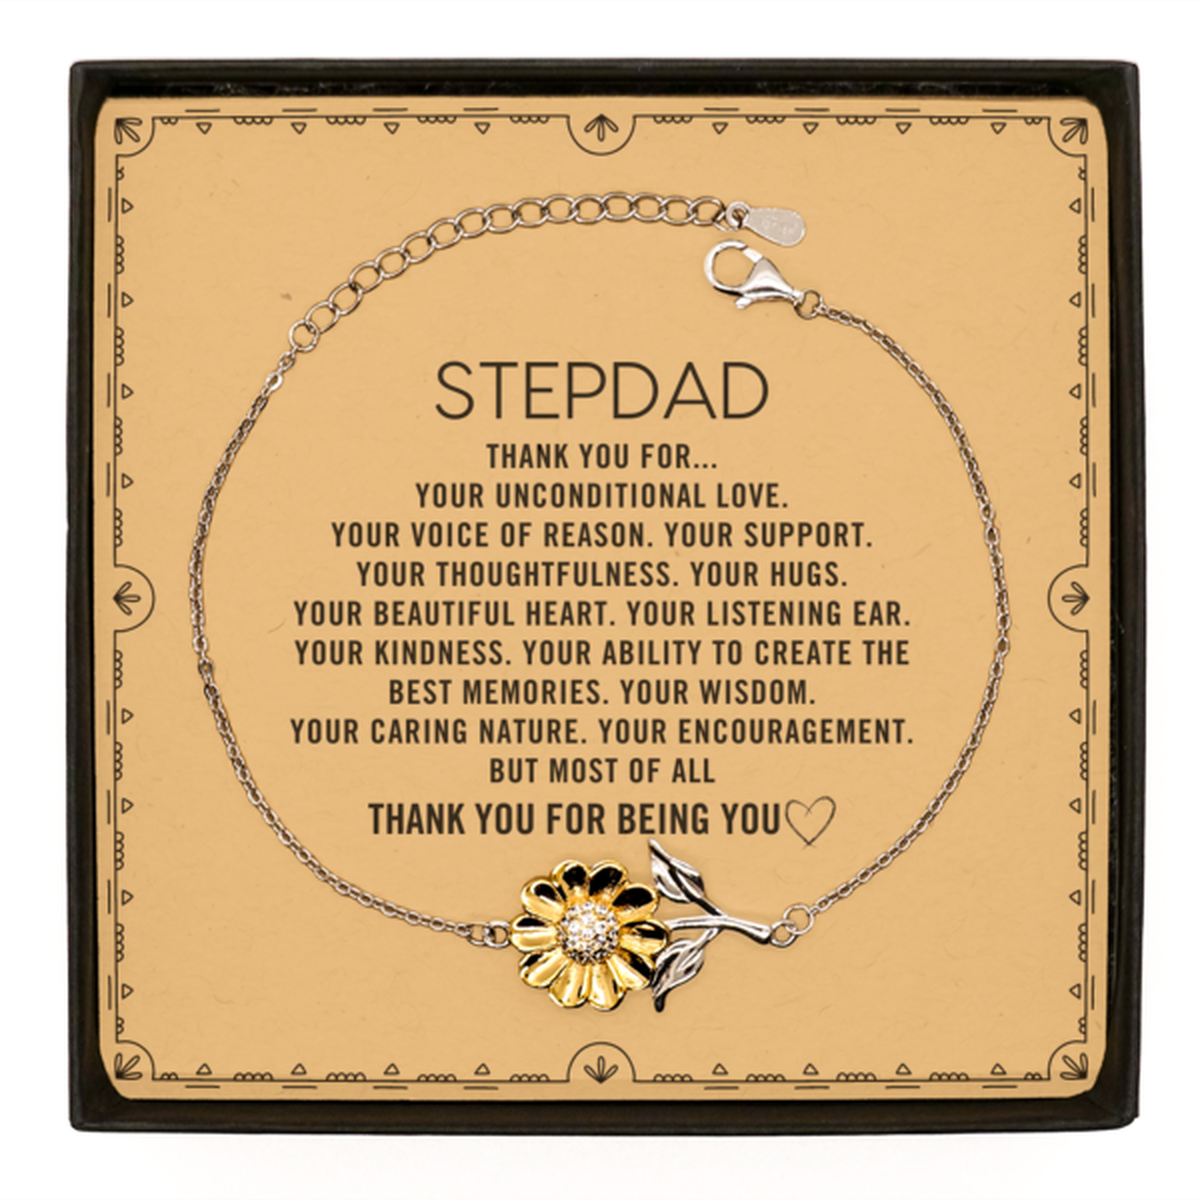 Stepdad Sunflower Bracelet Custom, Message Card Gifts For Stepdad Christmas Graduation Birthday Gifts for Men Women Stepdad Thank you for Your unconditional love